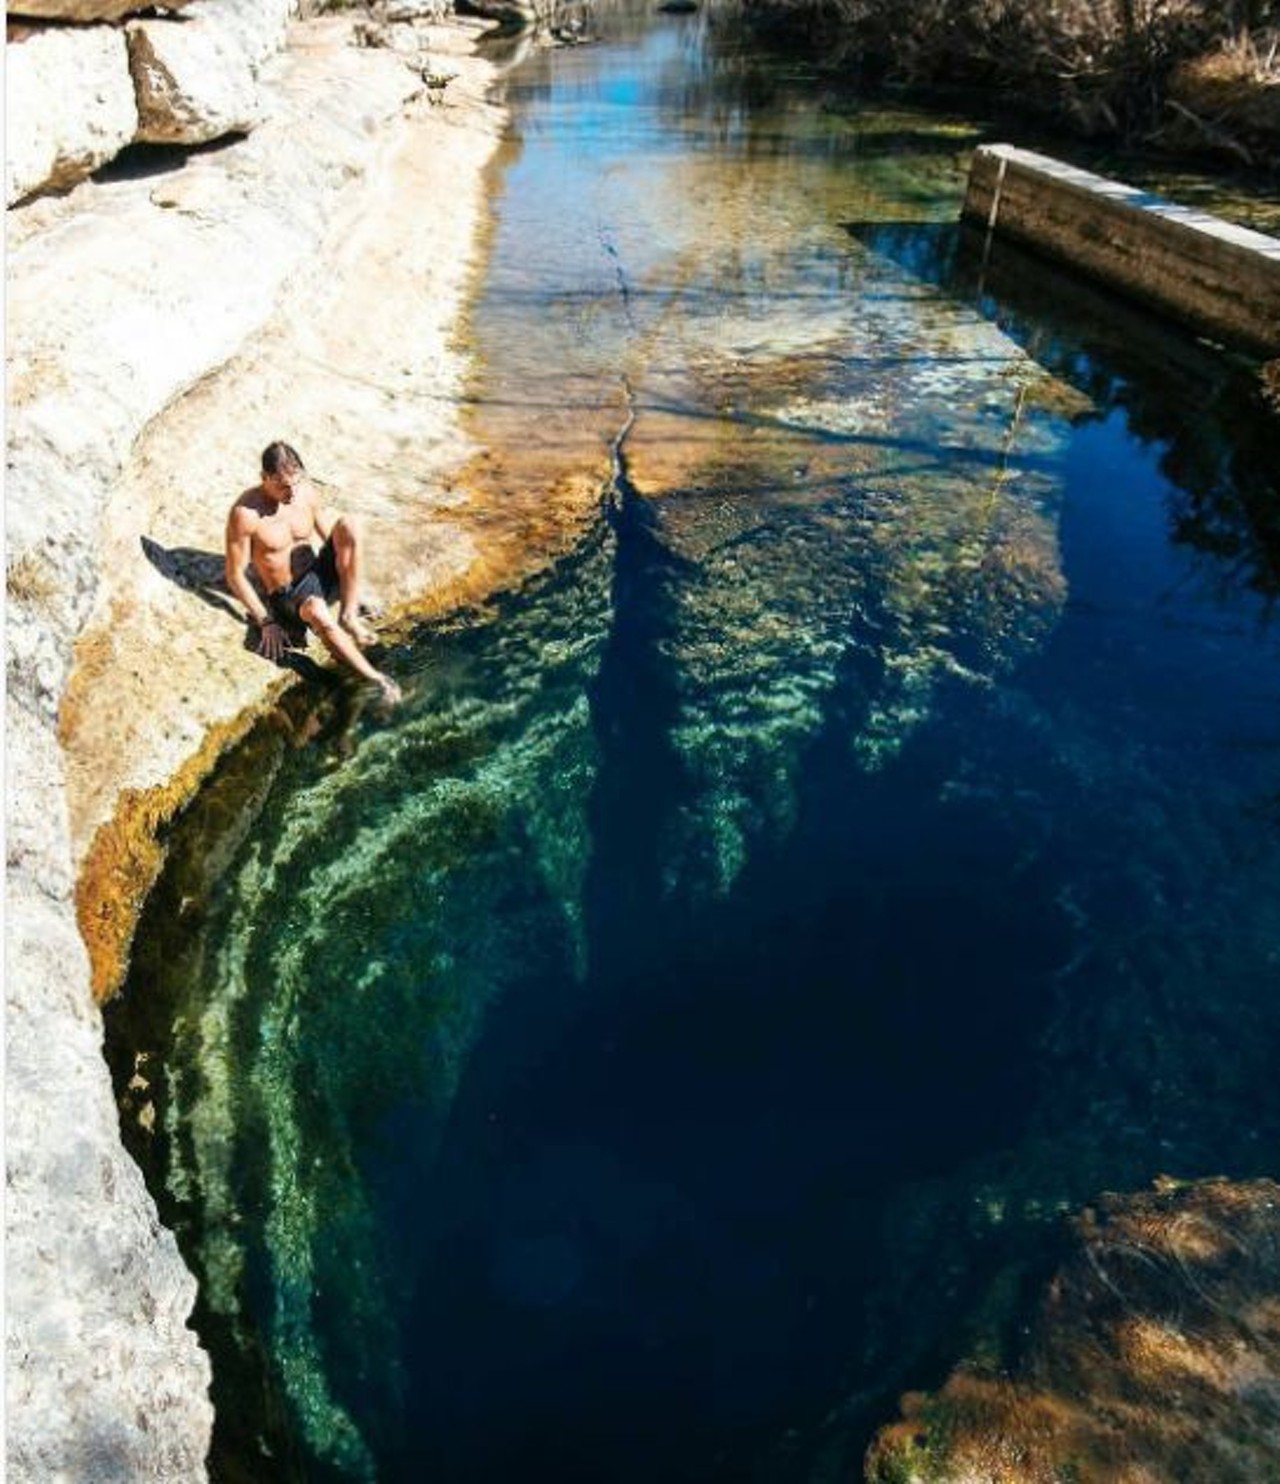 Jacob&#146;s Well 
Jacob&#146;s Well is a largely vertical, very deep swimming hole fed by an underwater spring, keeping the water 68 degrees year-round. The roughly 13-foot wide hole beckons daredevils to flip and leap into the hole from overlooking rocks like Mario into the sewer pipes. It should also be mentioned that it&#146;s been called the most dangerous diving site in the world. The labyrinthine underwater cave systems that branch out underneath the surface have swallowed up so many daredevil scuba divers that eventually a grate was put in around 100 feet down to block the depths. It was quickly removed, a plastic slate left in its place saying: &#147;you can&#146;t keep us out.&#148;  
1699 Mount Sharp Rd, Wimberley, TX 78676
Photo by sashajuliard via euvounajanela